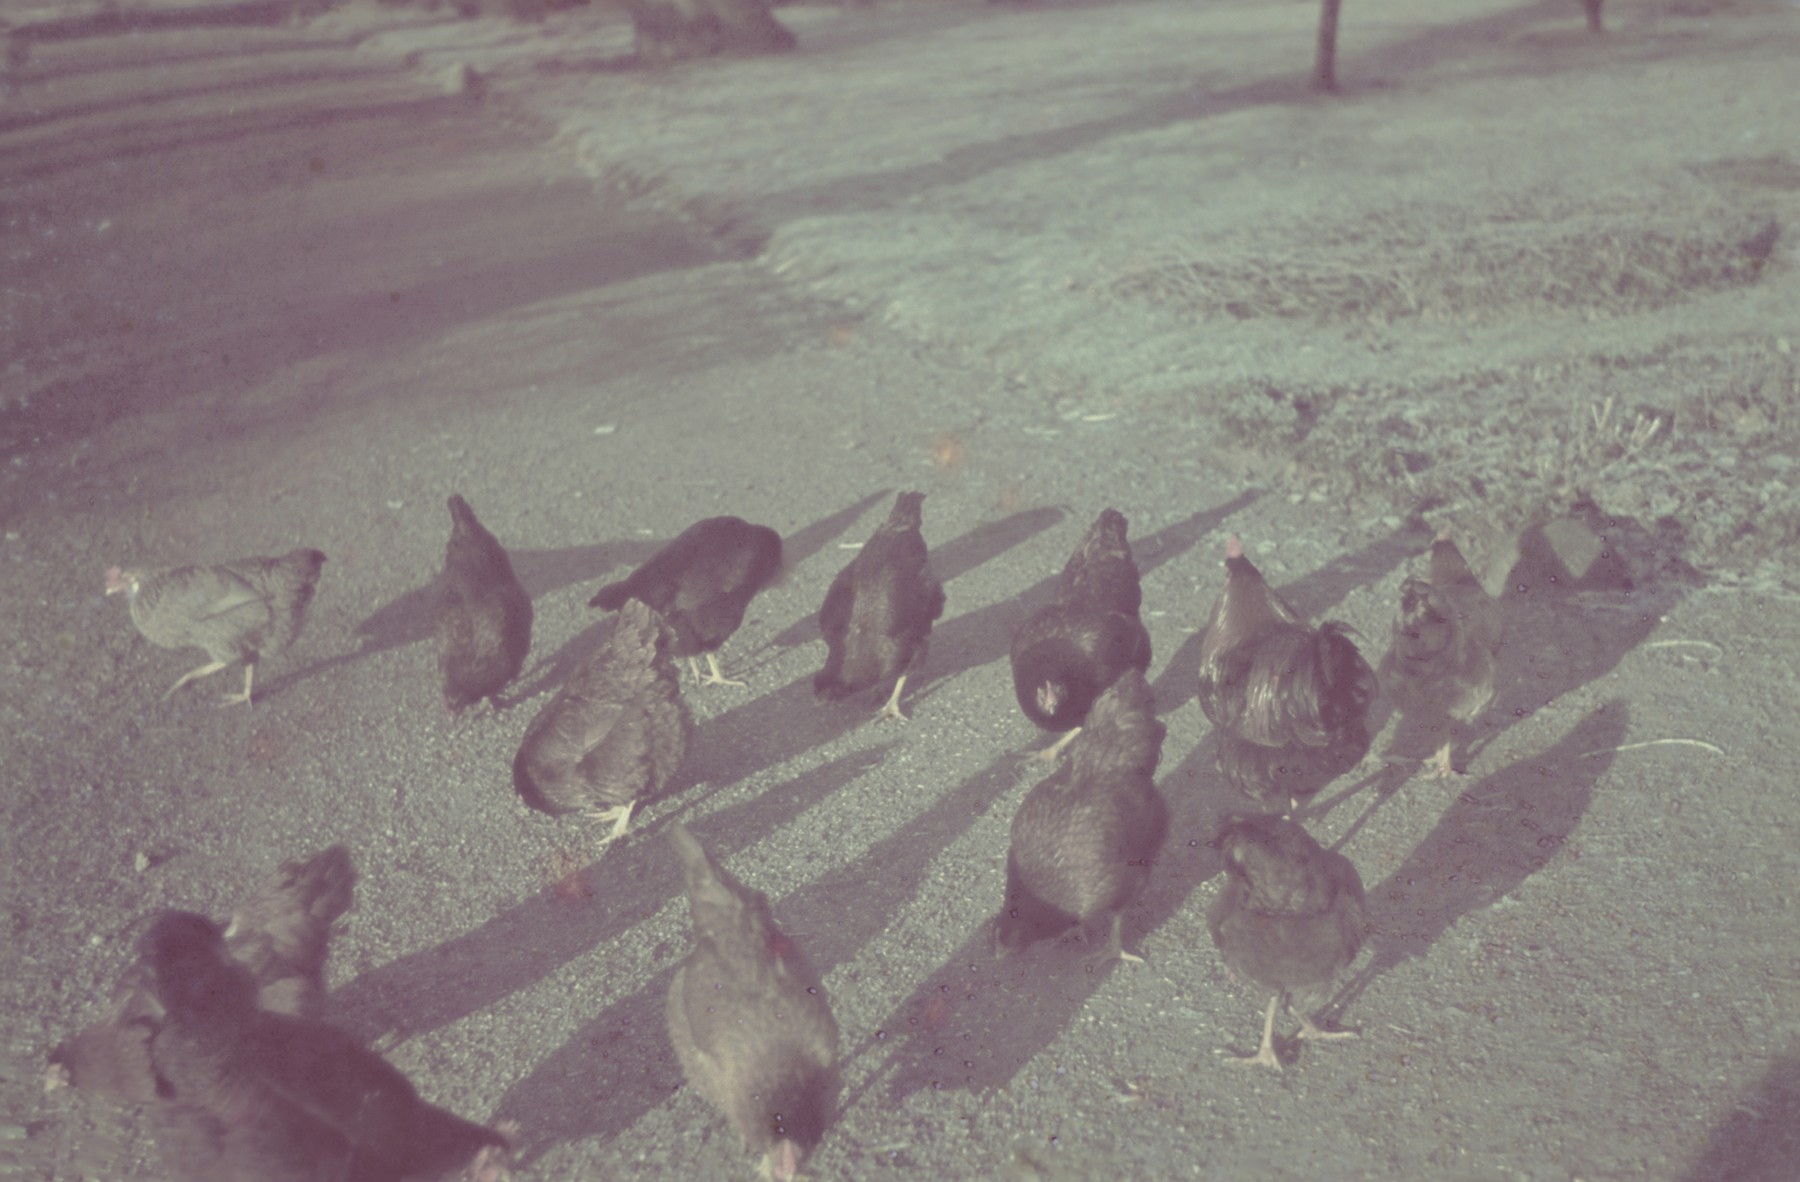 Photograph of chickens from the Genewein collection.